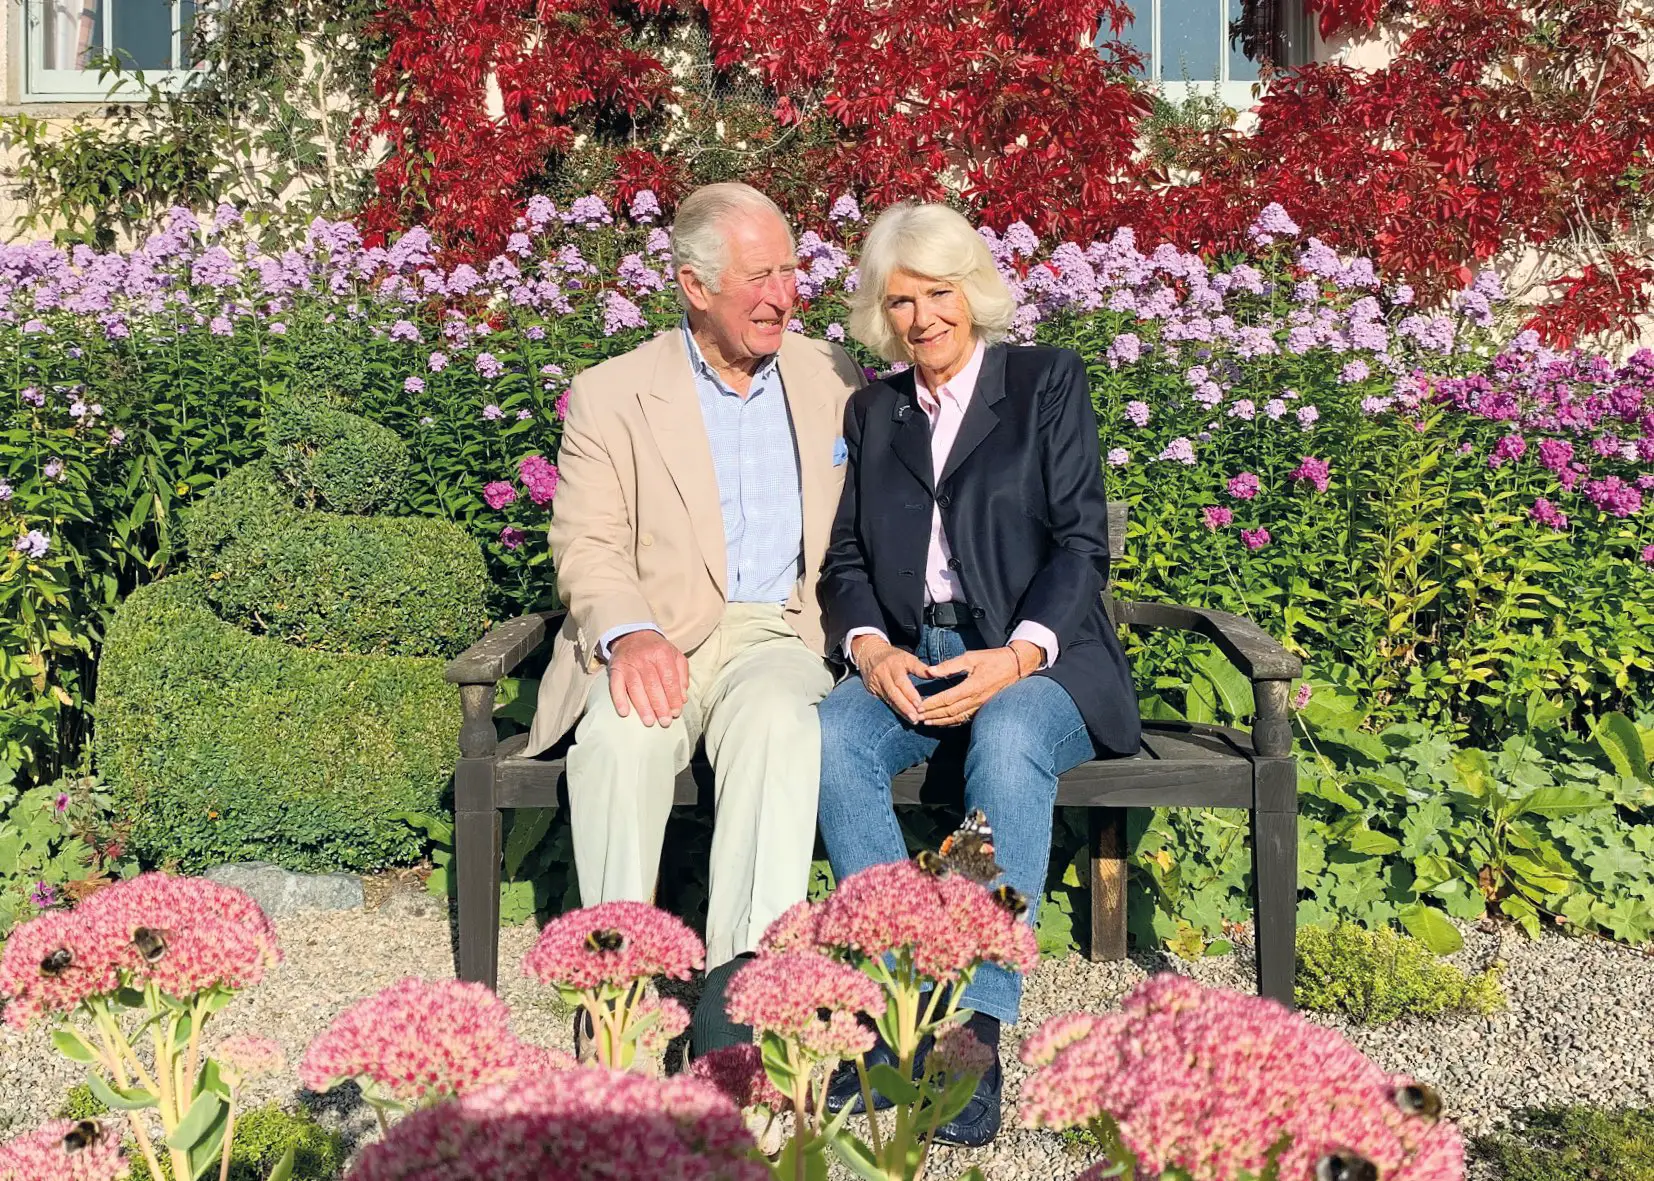 The Prince of Wales and The Duchess of Cornwall's Christmas 2020 picture